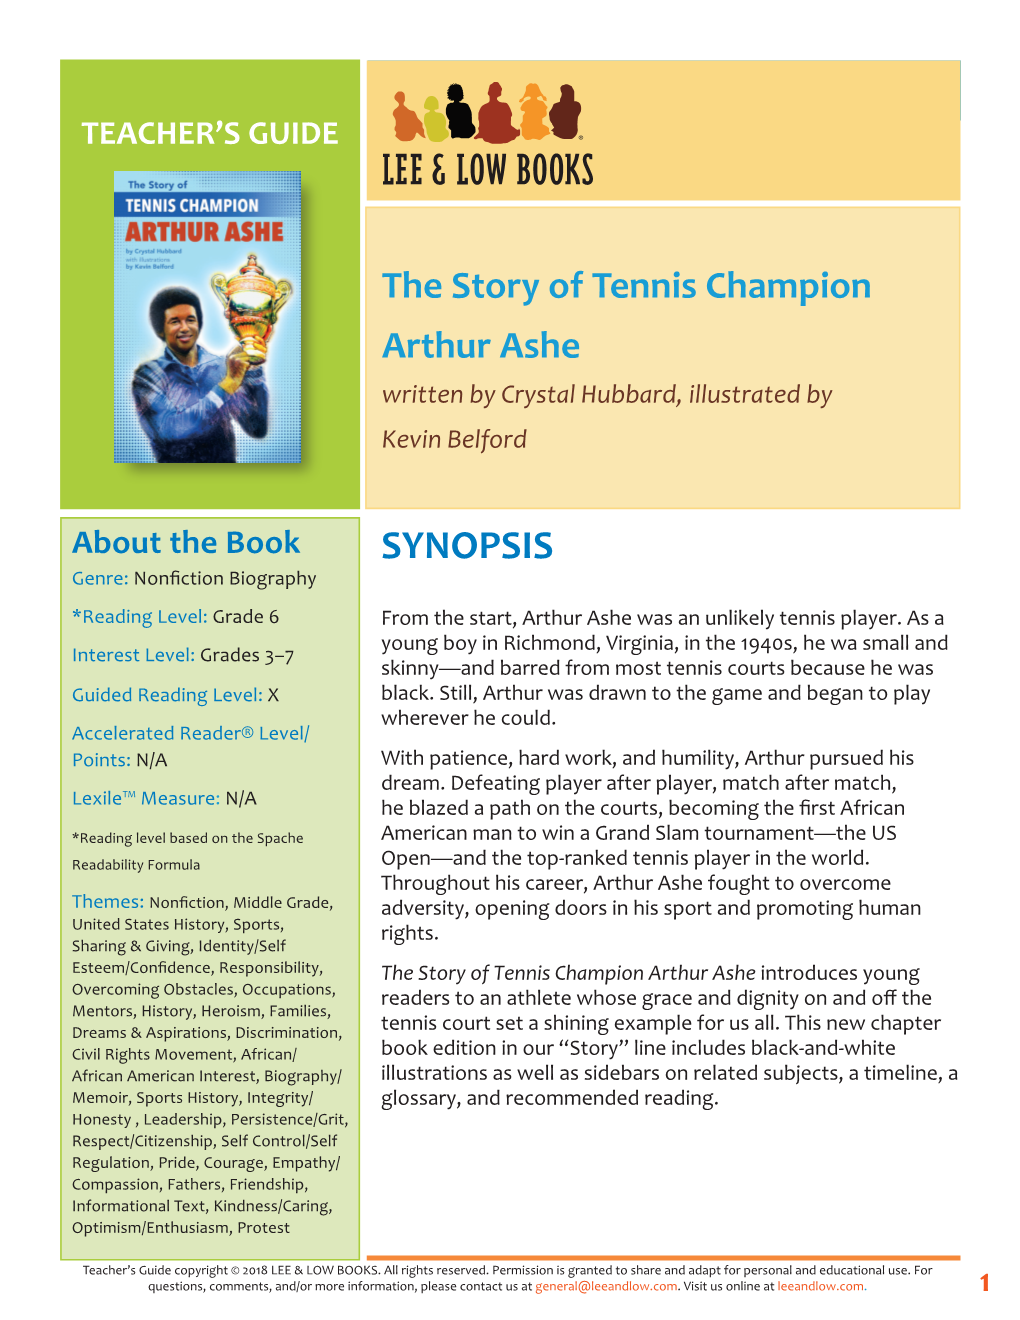 The Story of Tennis Champion Arthur Ashe Written by Crystal Hubbard, Illustrated by Kevin Belford